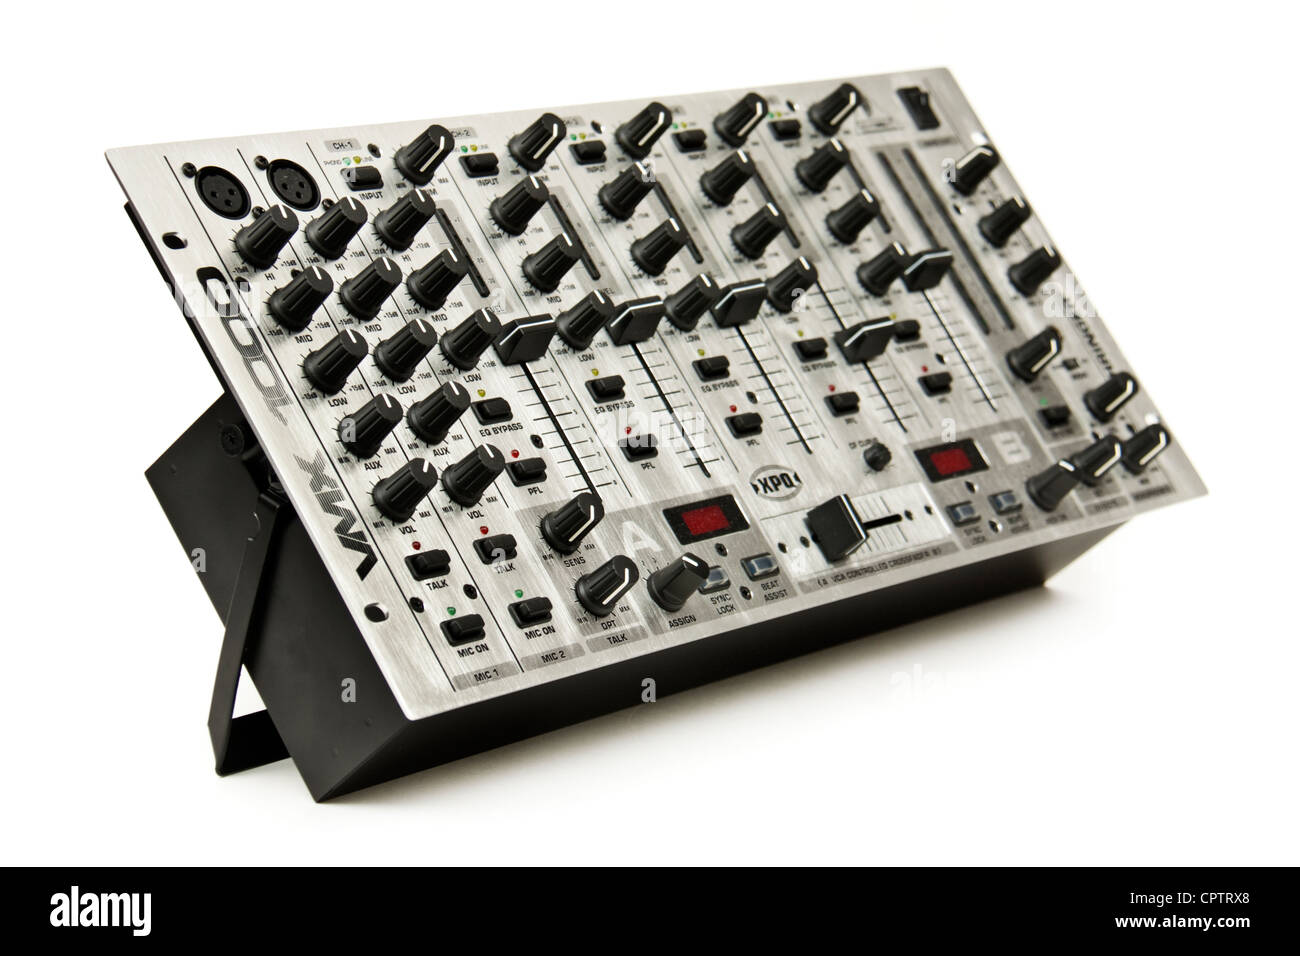 Behringer VMX1000 professional 7-channel DJ mixer with BPM counter Stock Photo